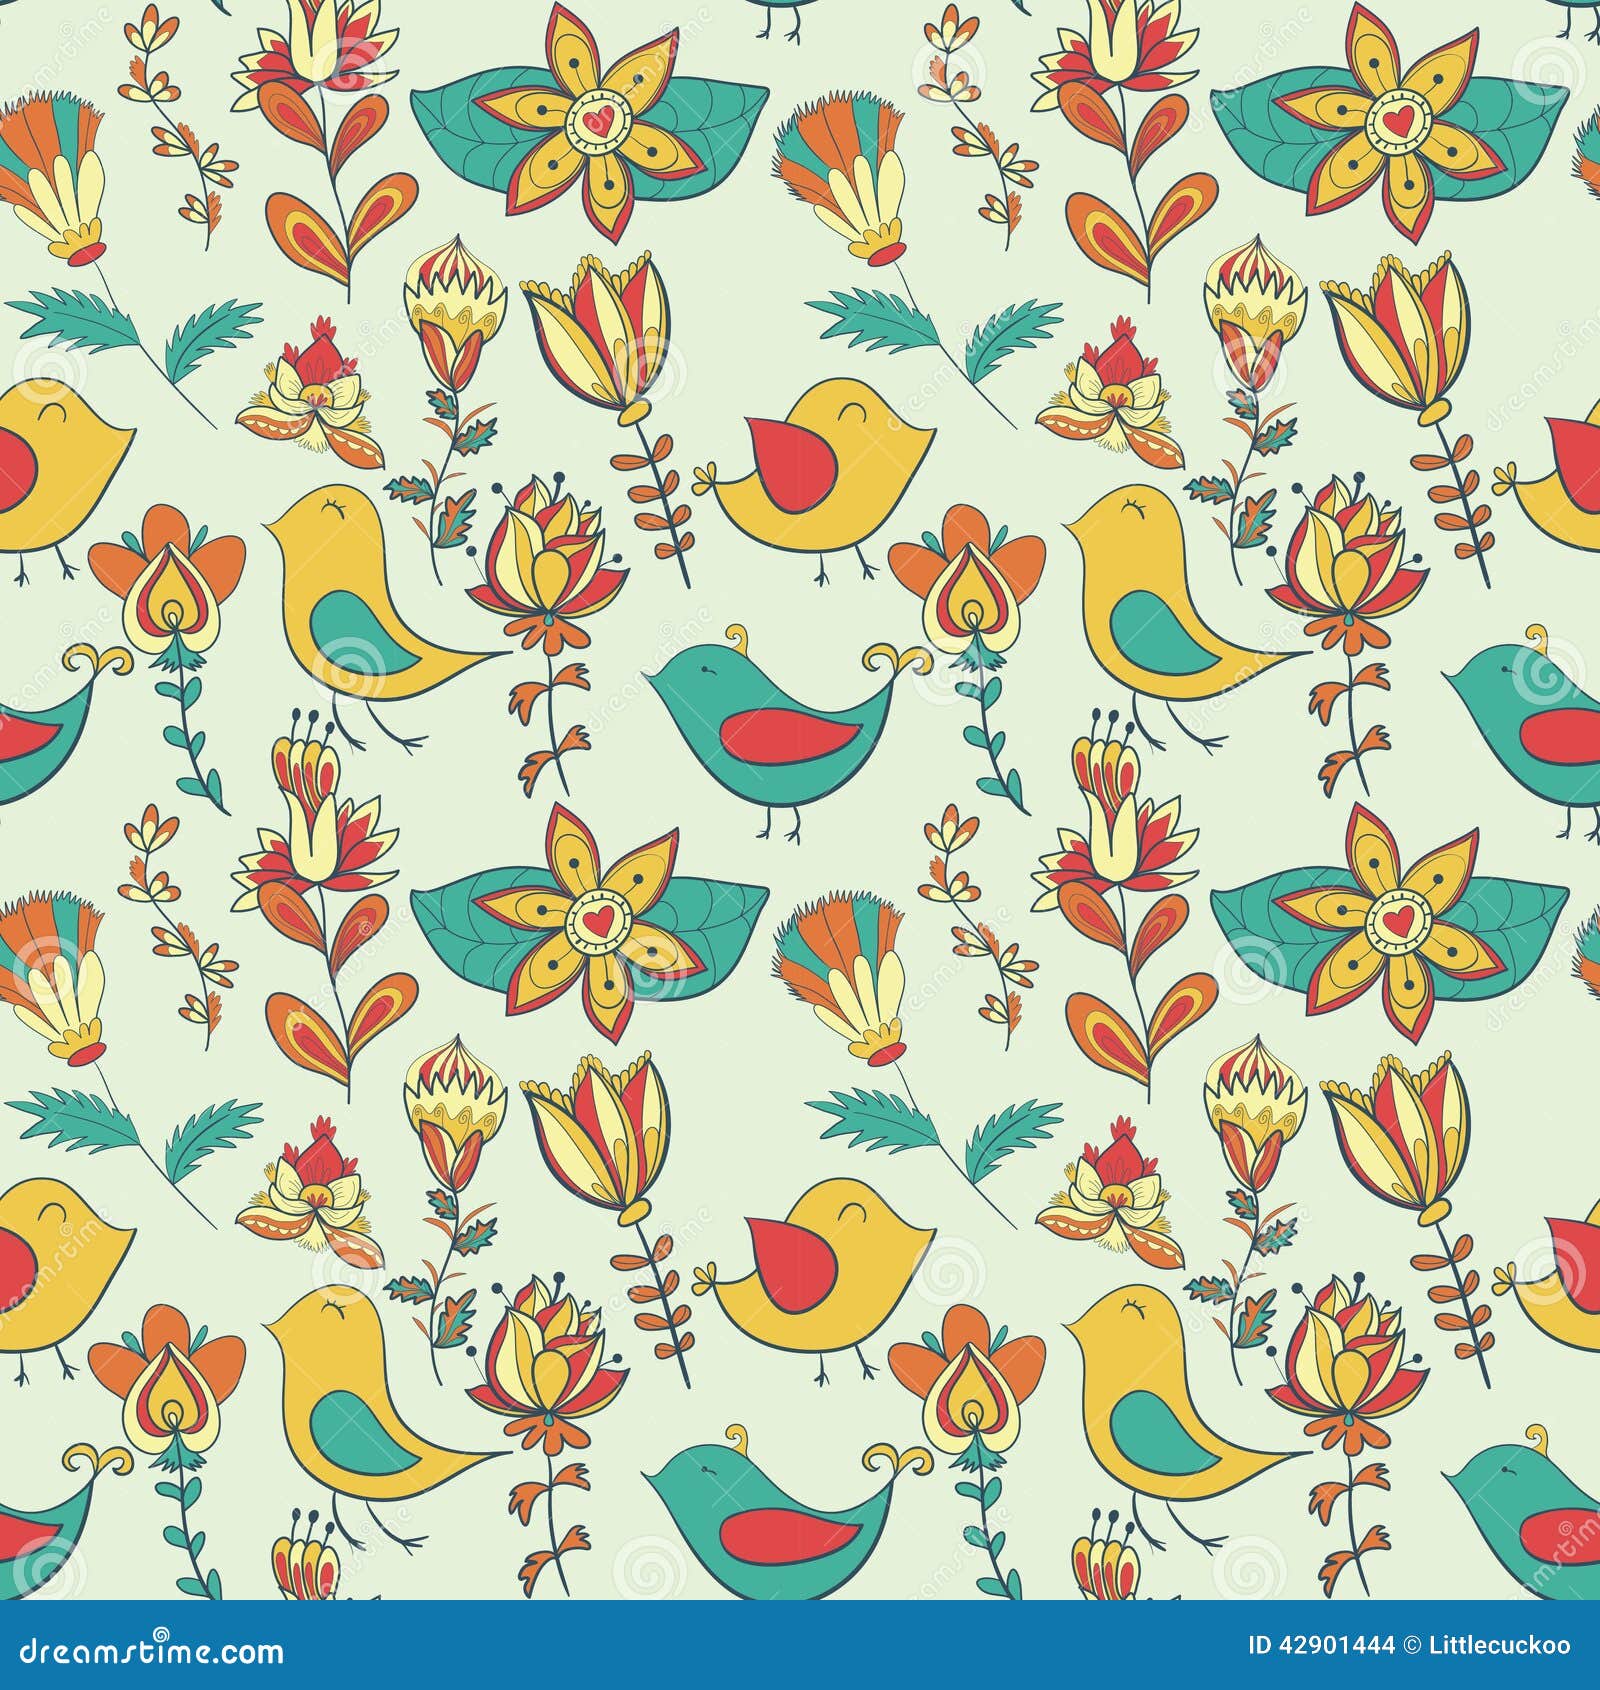 Flower and bird. Seamless texture. Endless floral pattern. Can be used for wallpaper or pattern, backdrop, surface textures. Full color seamless floral background